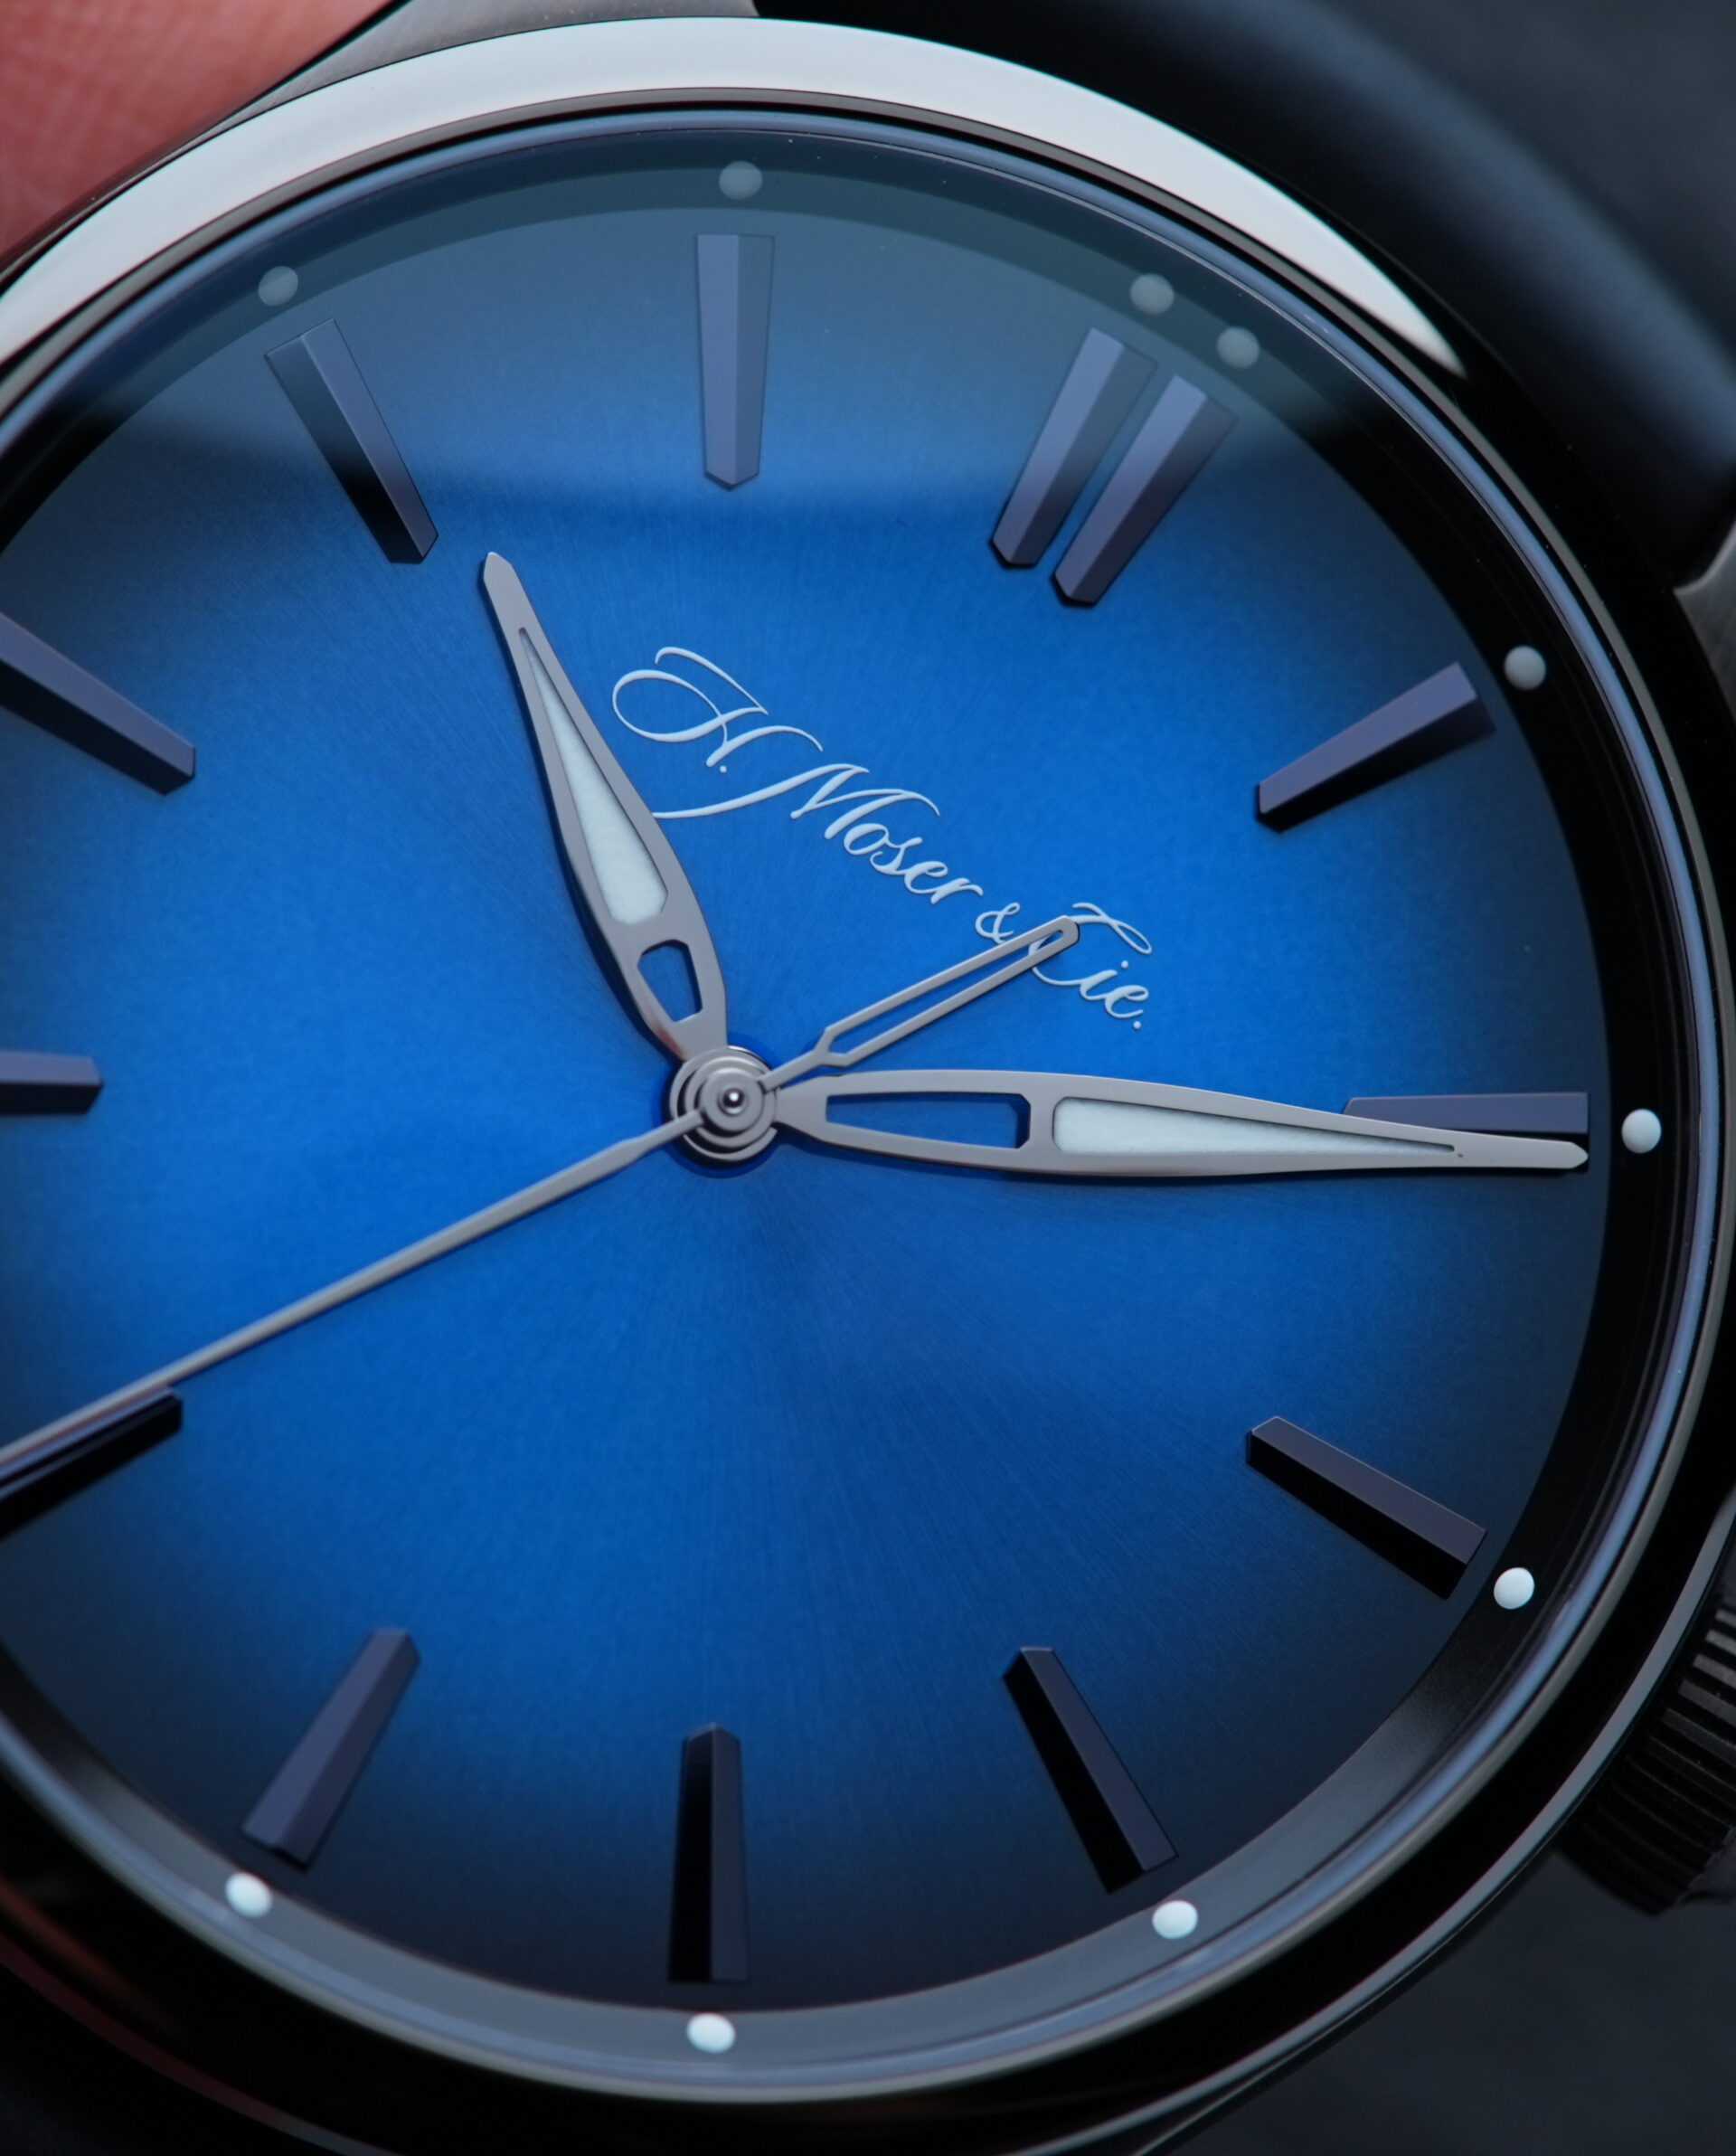 H.Moser & Cie. Pioneer Centre Seconds Funky Blue Fumé Black watch being held in hand.